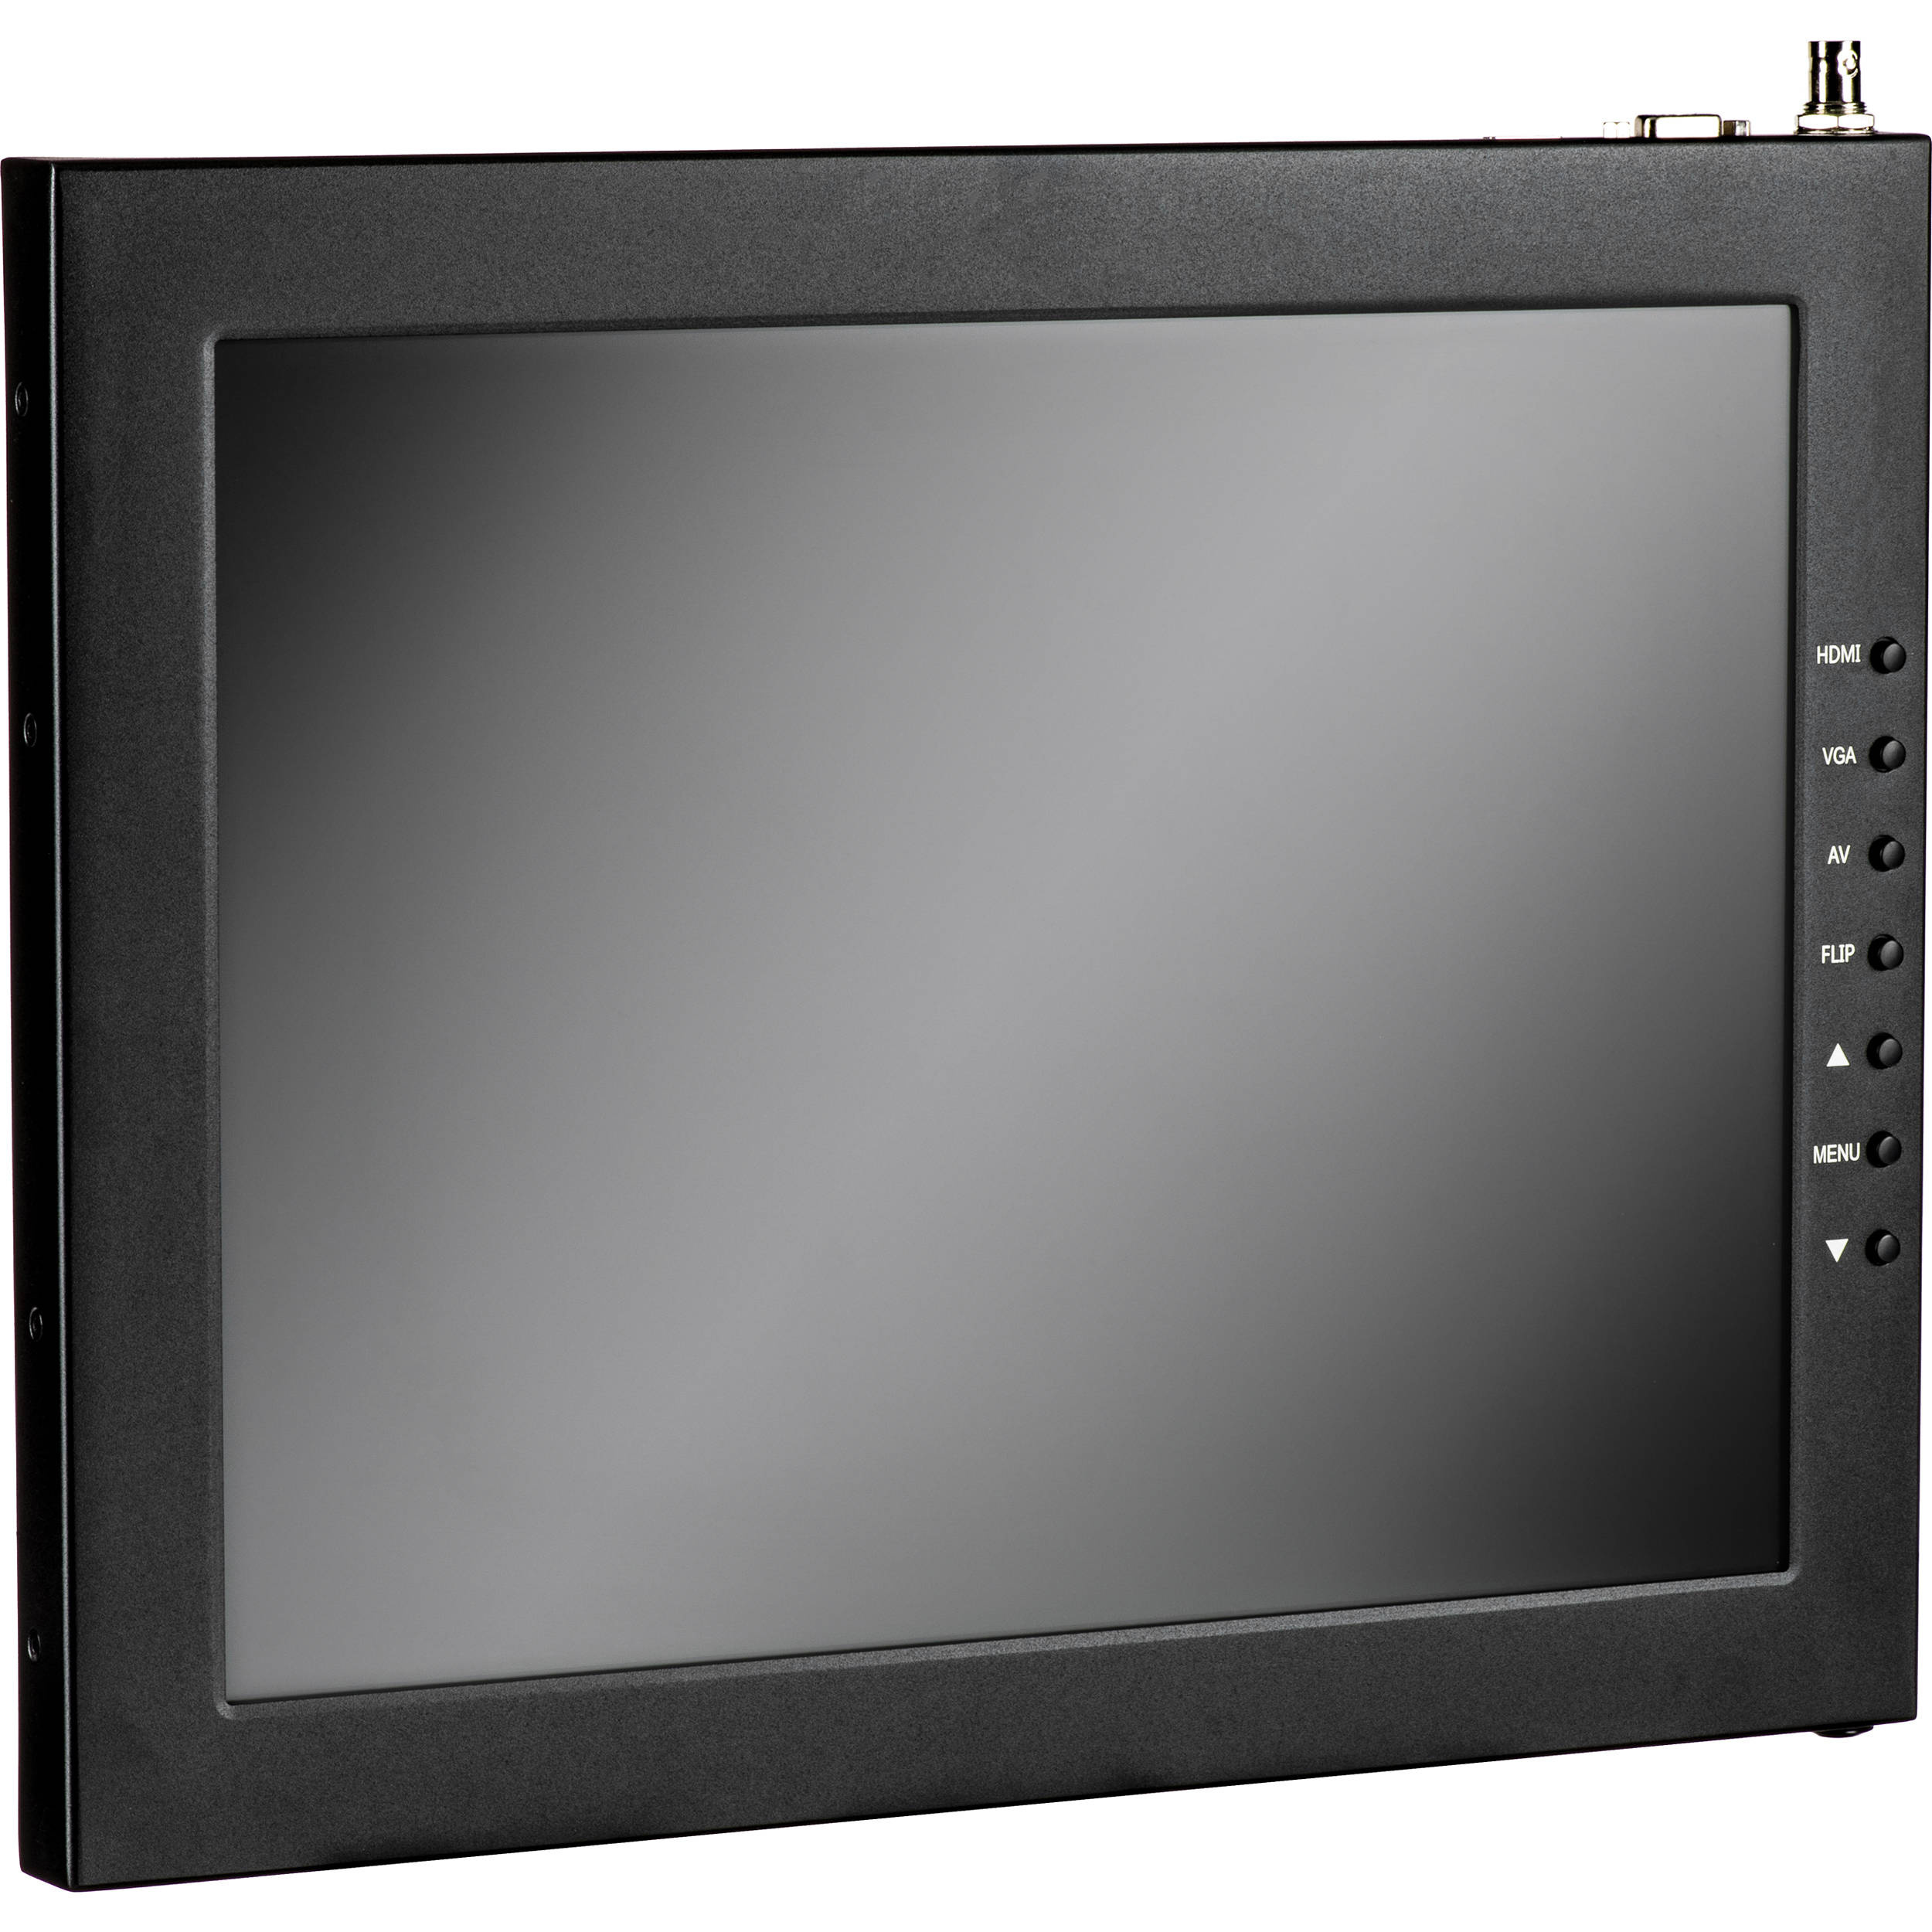 Ikan 15" Teleprompter Monitor for PT3100E and PT3500